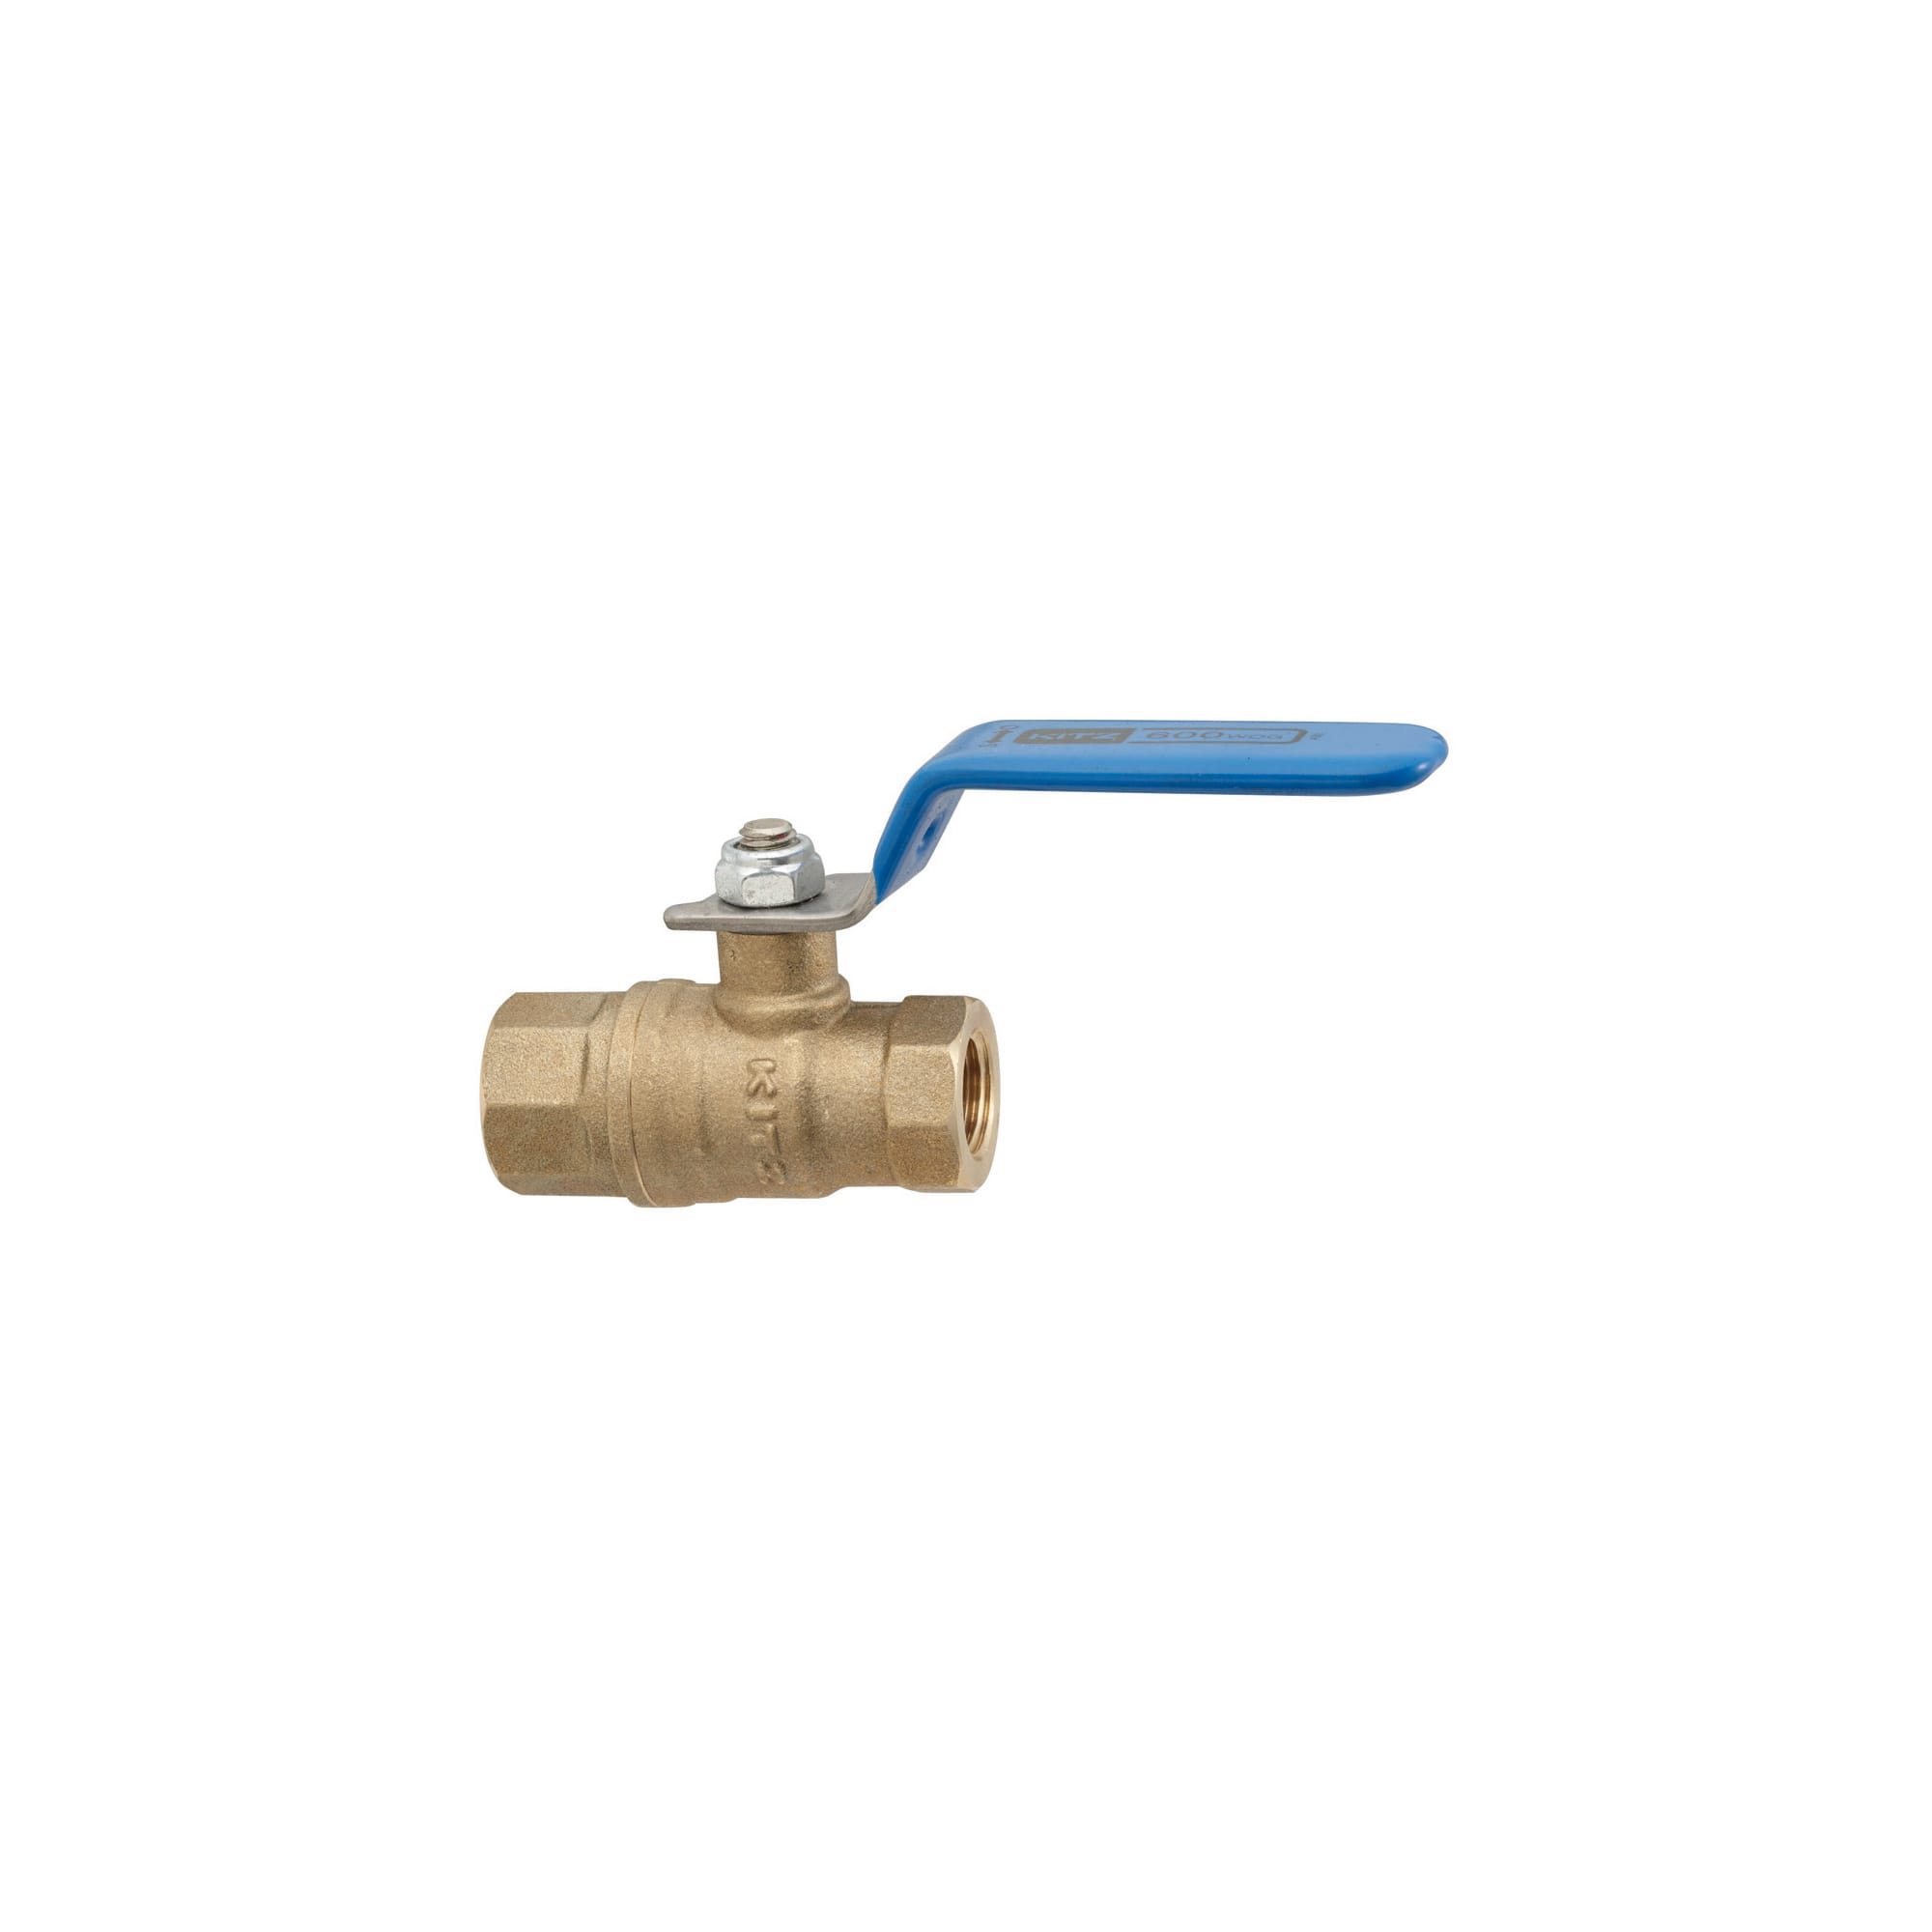 Details about   ball valve,1" DN25 3 way 316,female stainless steel ball valve,handle AT T port 